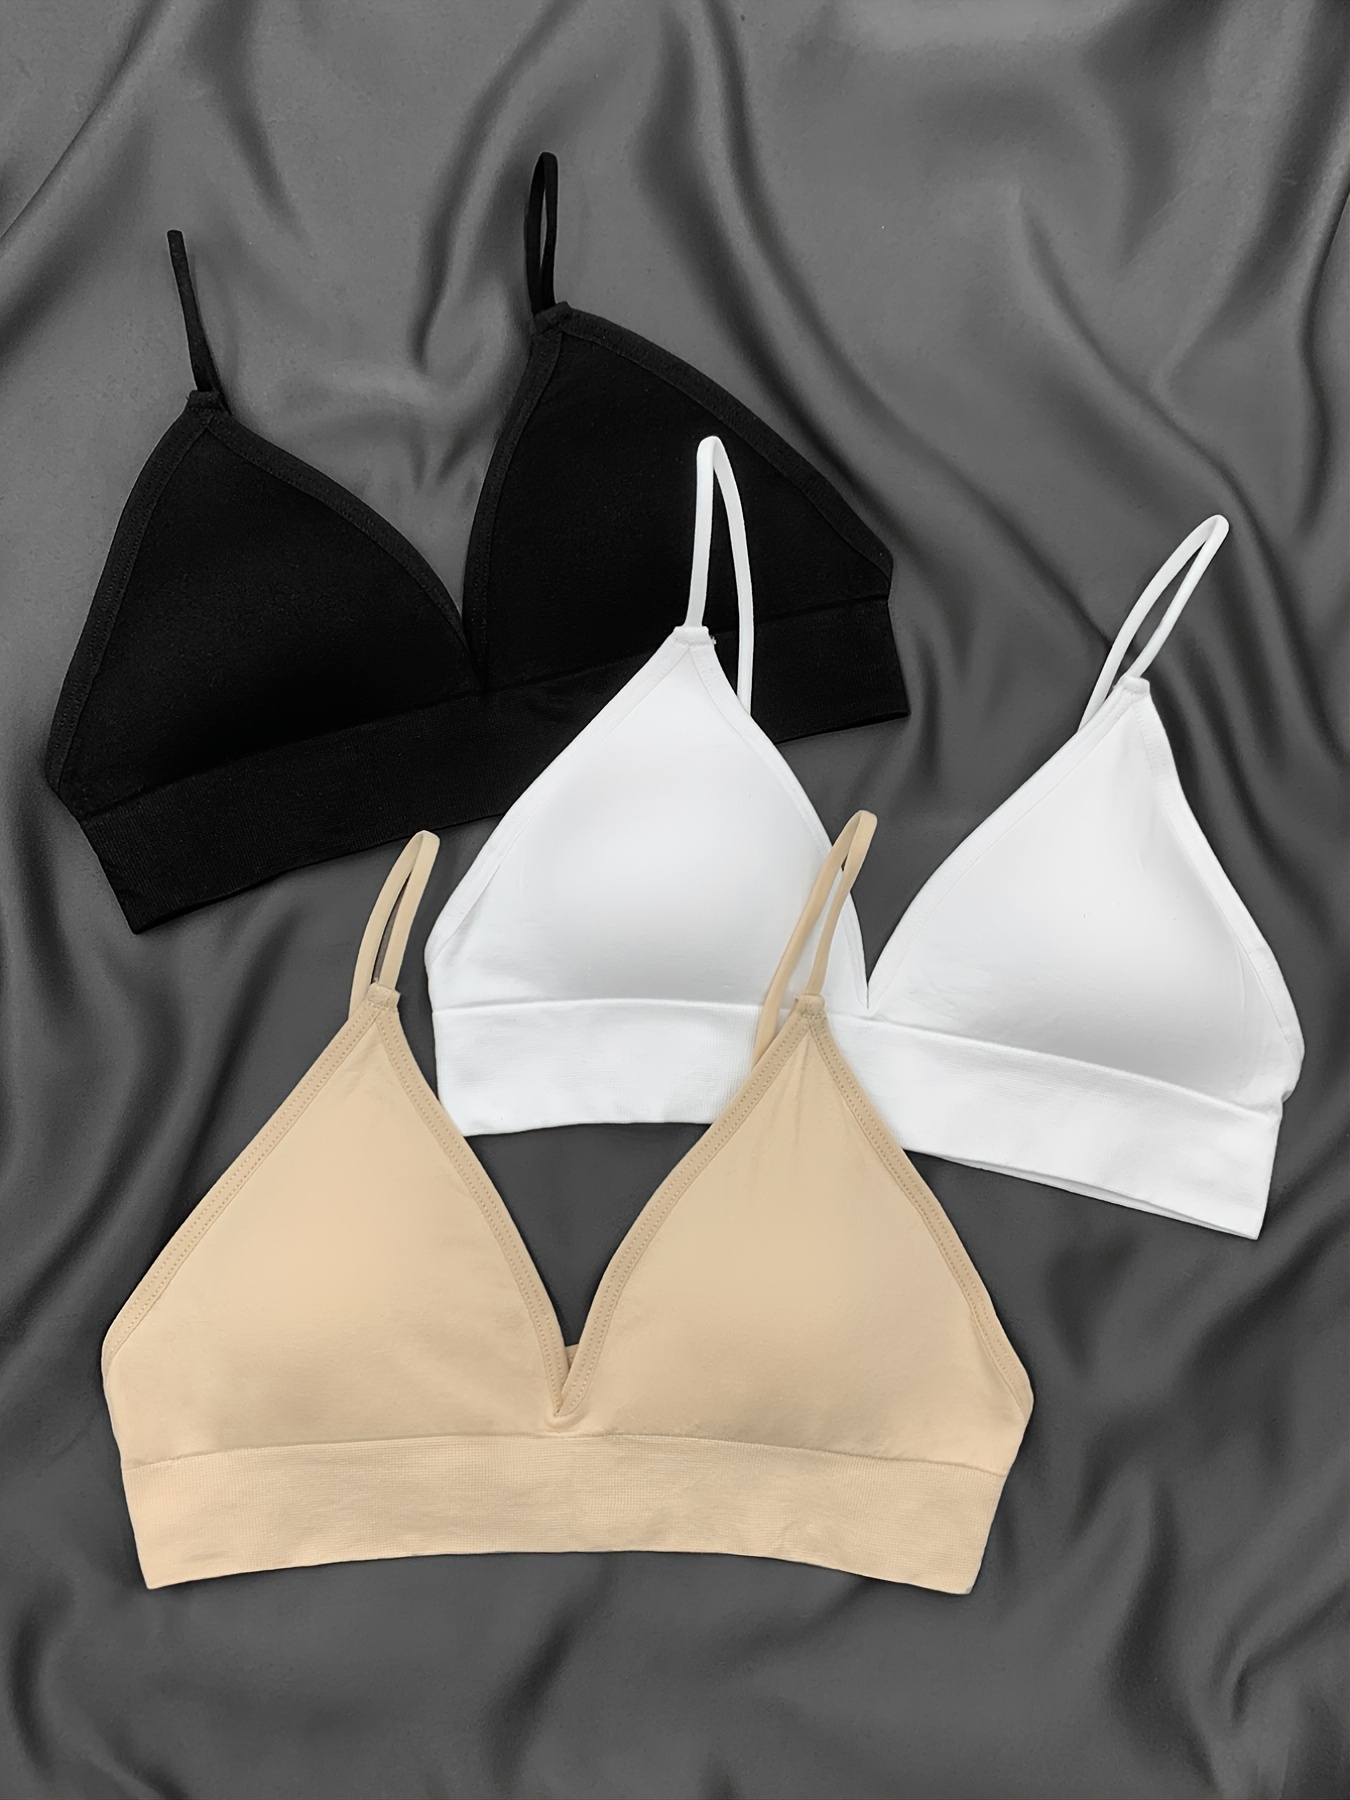 Bralette For Women Girls Teens Low Support Triangle V Neck Bra Front Button  Slim Strap Training Bra Padded Wire